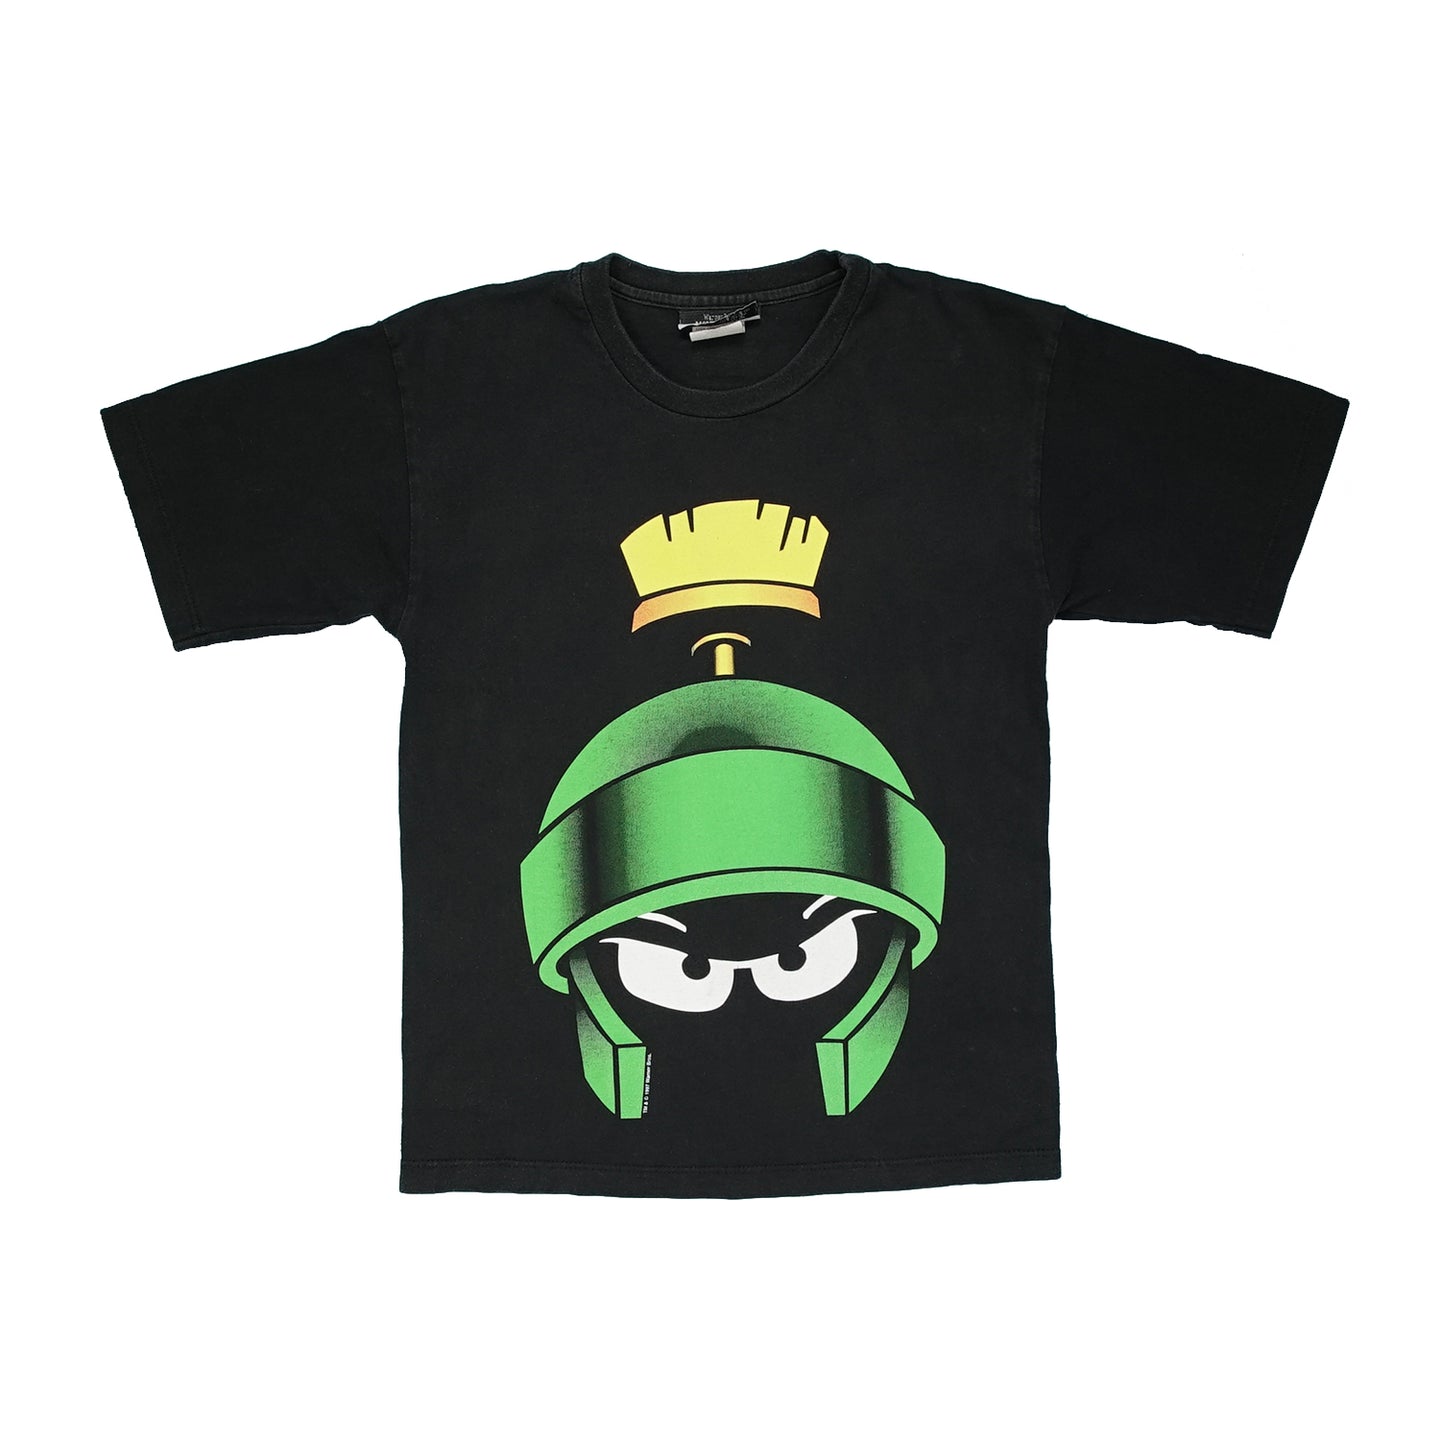 Vintage Marvin the Martian tee XS